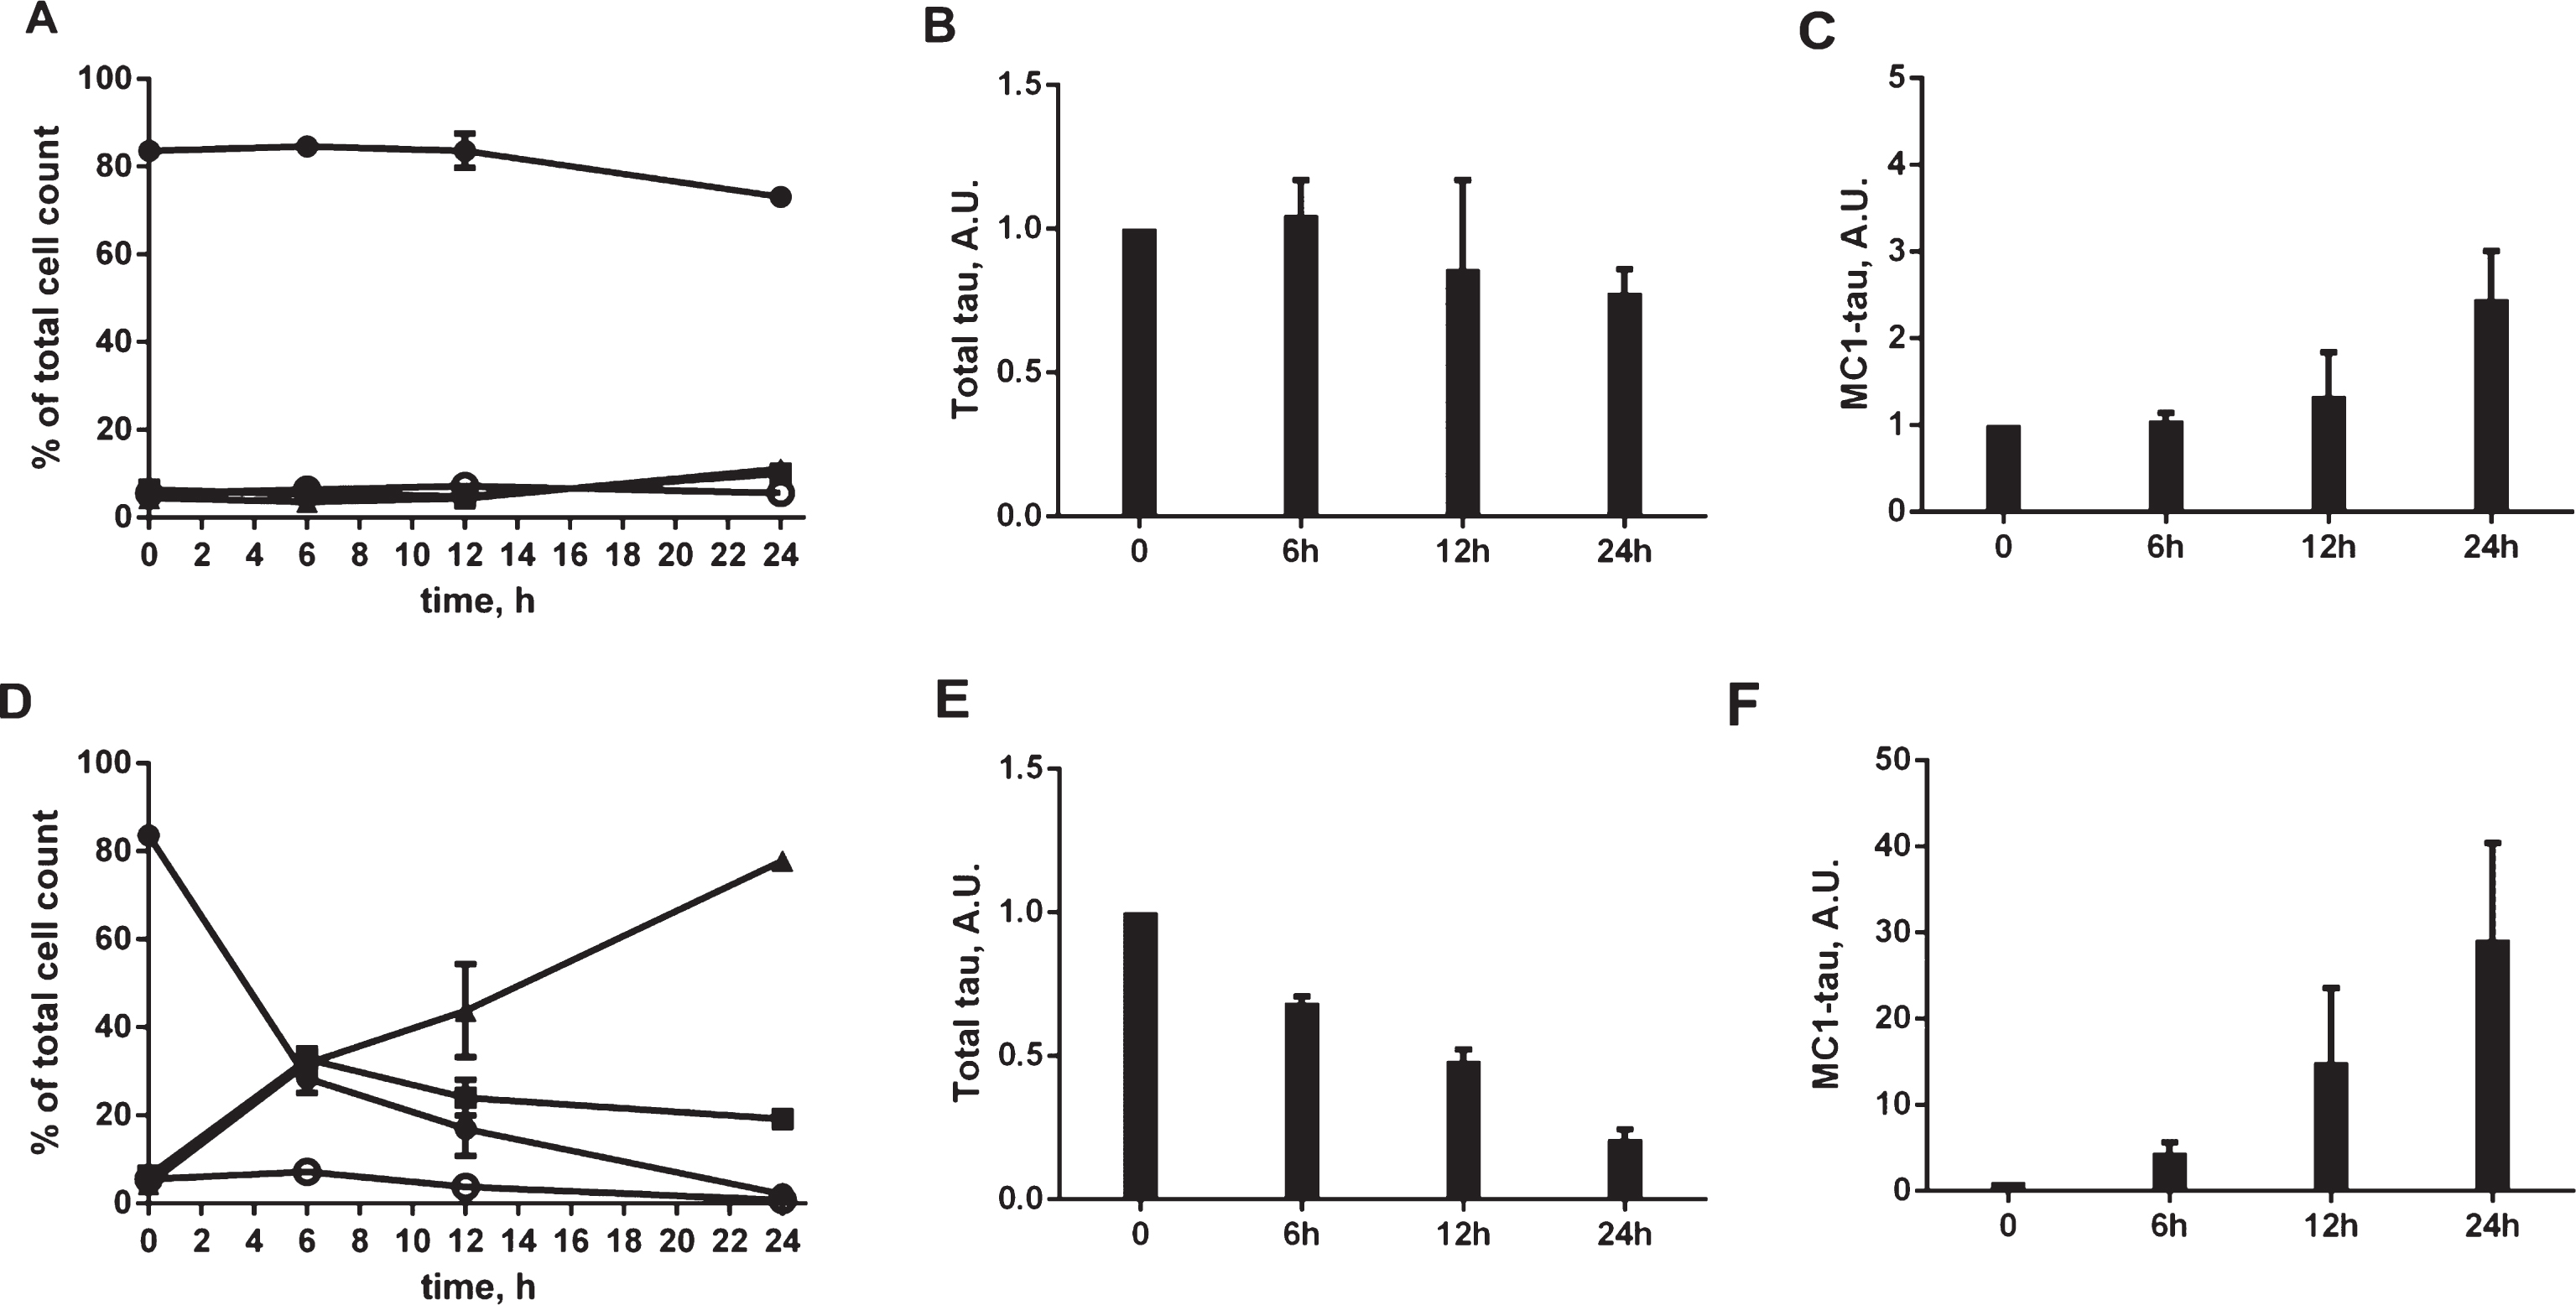 Time-course of caspase activation and induction of conformationally-changed tau after treatment of N2a cells with staurosporine. Caspase activation in N2a cells transiently transfected with the 2N4R tau cDNA alone (A) and treated with 1μM staurosporine (D). Samples were collected at time zero, 6 h, 12 h, and 24 h. Caspase activation was detected using a fluorochrome-conjugated pan-caspase inhibitor (SR-VAD-FMK) in a GUAVA PCA96 flow cytometer. Membrane structural integrity was detected by the cell impermeable dye 7-AAD. Cells with low, moderate, or high levels of caspase activation correspond to filled circles, filled squares, and filled triangles, respectively. Dead cells with no active caspases present and permeable membranes are marked as open circles (A, D). Relative amounts of total tau in DA9/CP27 ELISA in control lysates (B) and after treatment with 1μM staurosporine (E). Relative amounts of conformationally-changed tau levels measured by MC1/CP27 ELISA in control lysates (C) and after treatment with 1μM staurosporine (F). Linear regression with variable slope analyses was used to calculate relative amounts of total tau and conformationally-changed tau from standard curves obtained from purified PHFs. Each point represents the mean value of six independent samples. A.U., arbitrary units.